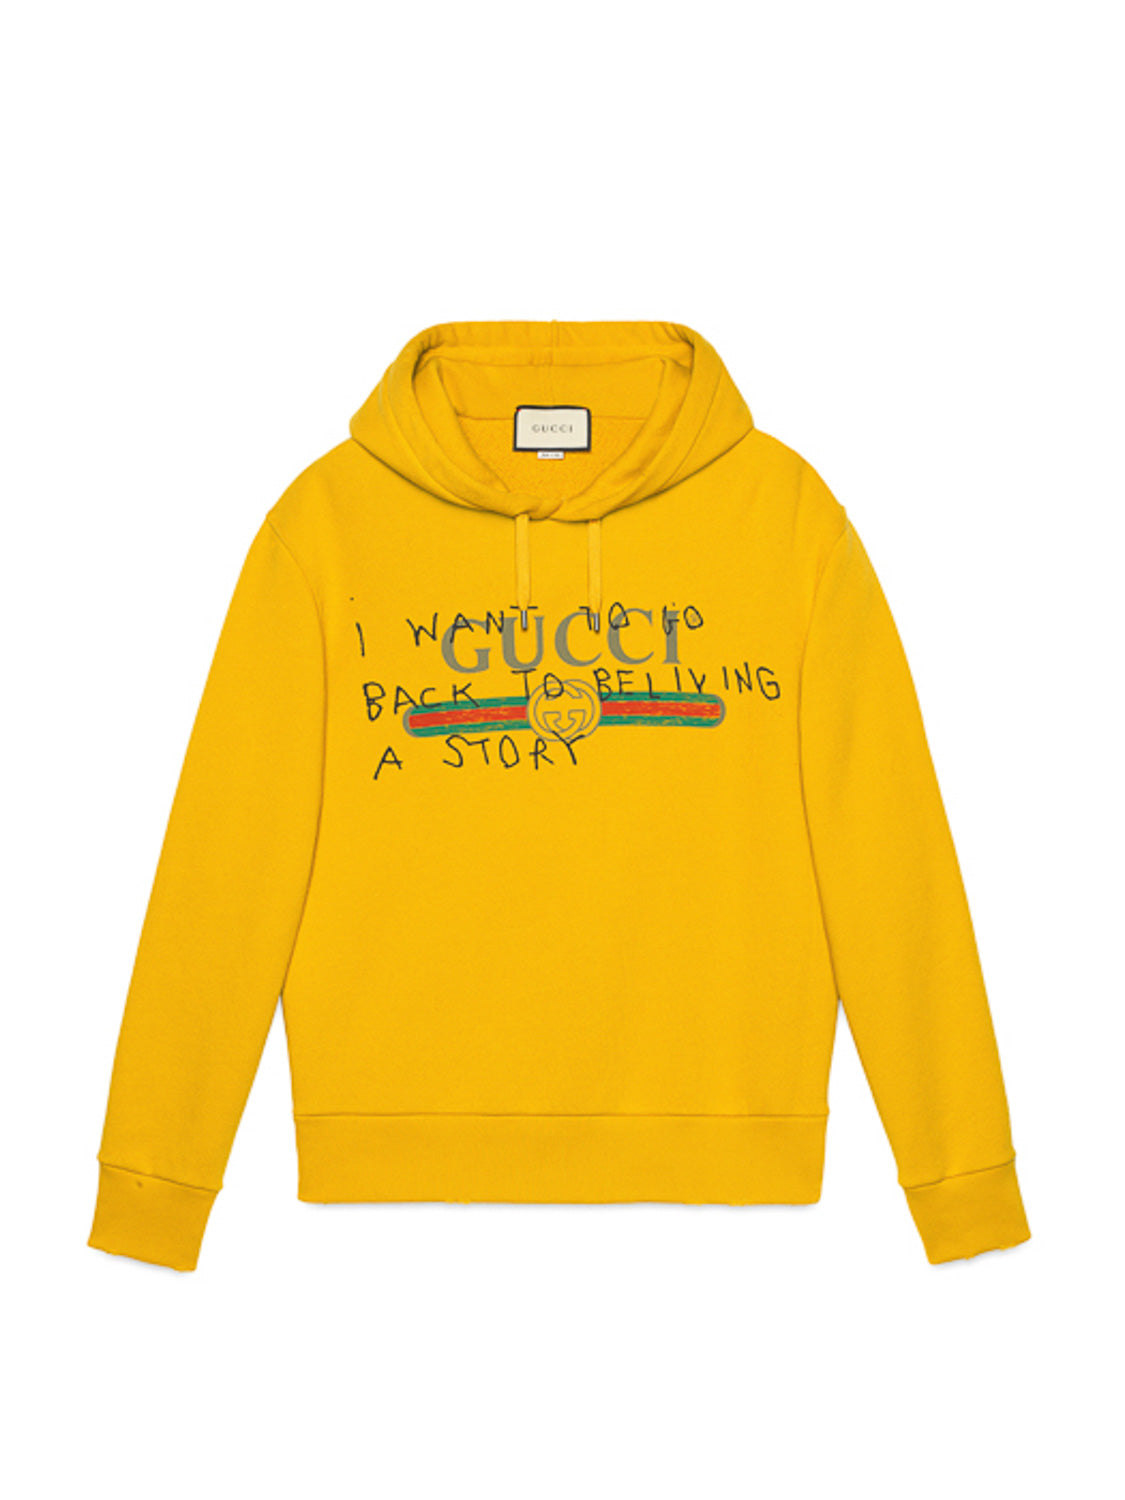 Gucci Logo Hoodie Coco Capitan Yellow - Centrall Online